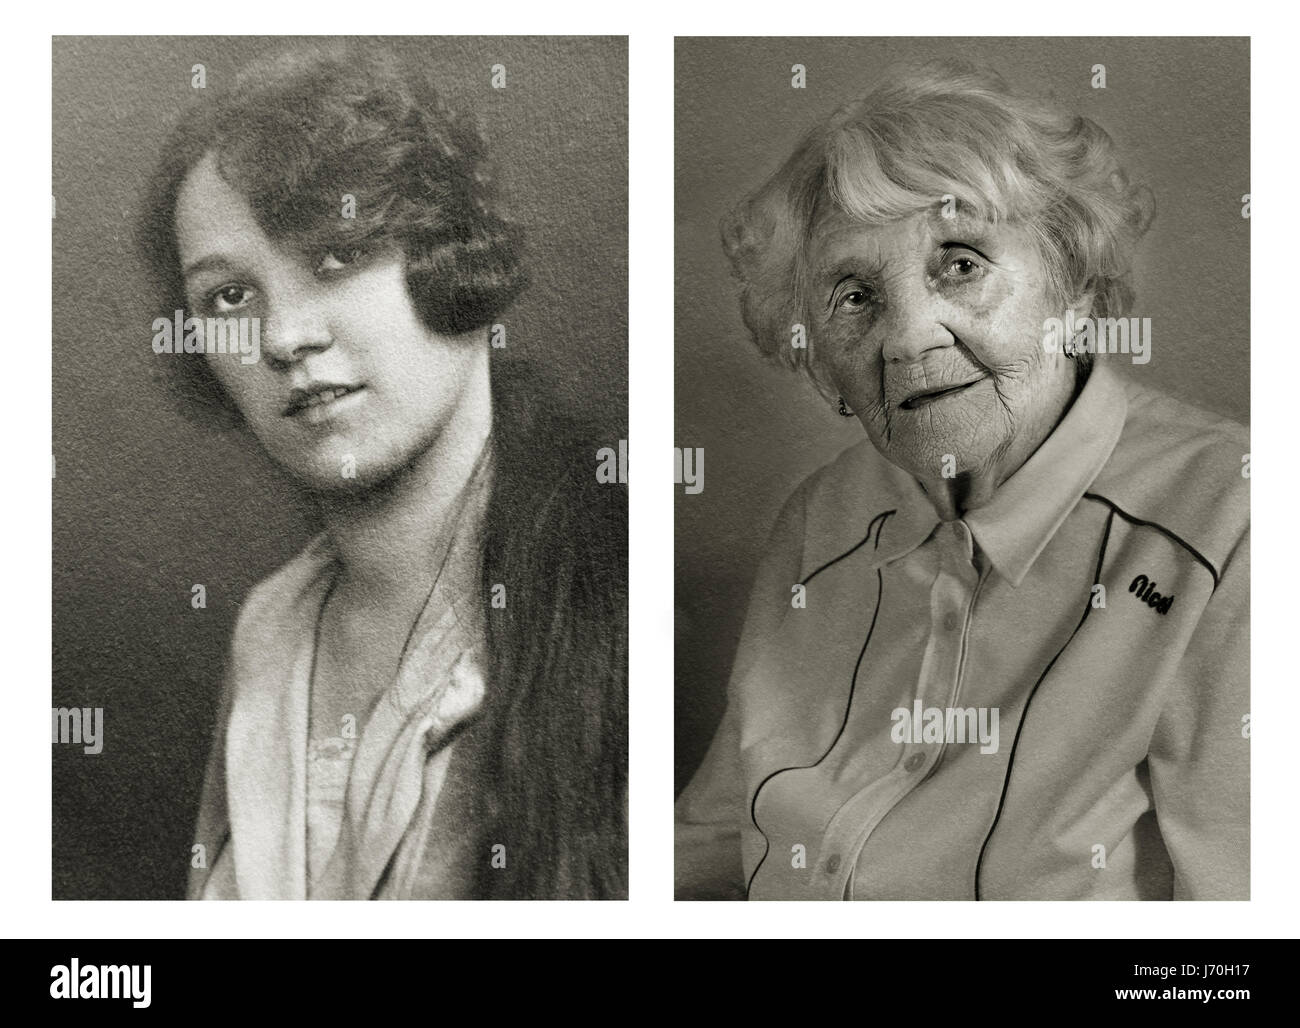 Vlasta Čížková. LEft: 23 years old, right: 101 years old. She was a cook in an airprot dining room and now lives in her own house in the same village as her family. She was in the truck that hit  and killed high-ranking German Nazi official Reinhard Heydrich’s son Klaus in 1943. She was also arrested by communists in 1948.  POIGNANT portraits have posed centenarians alongside their younger selves in a project called Faces of Century. The incredible images tell the unique stories of each person’s life including one woman who was in the truck that hit and killed high-ranking German Nazi official Stock Photo